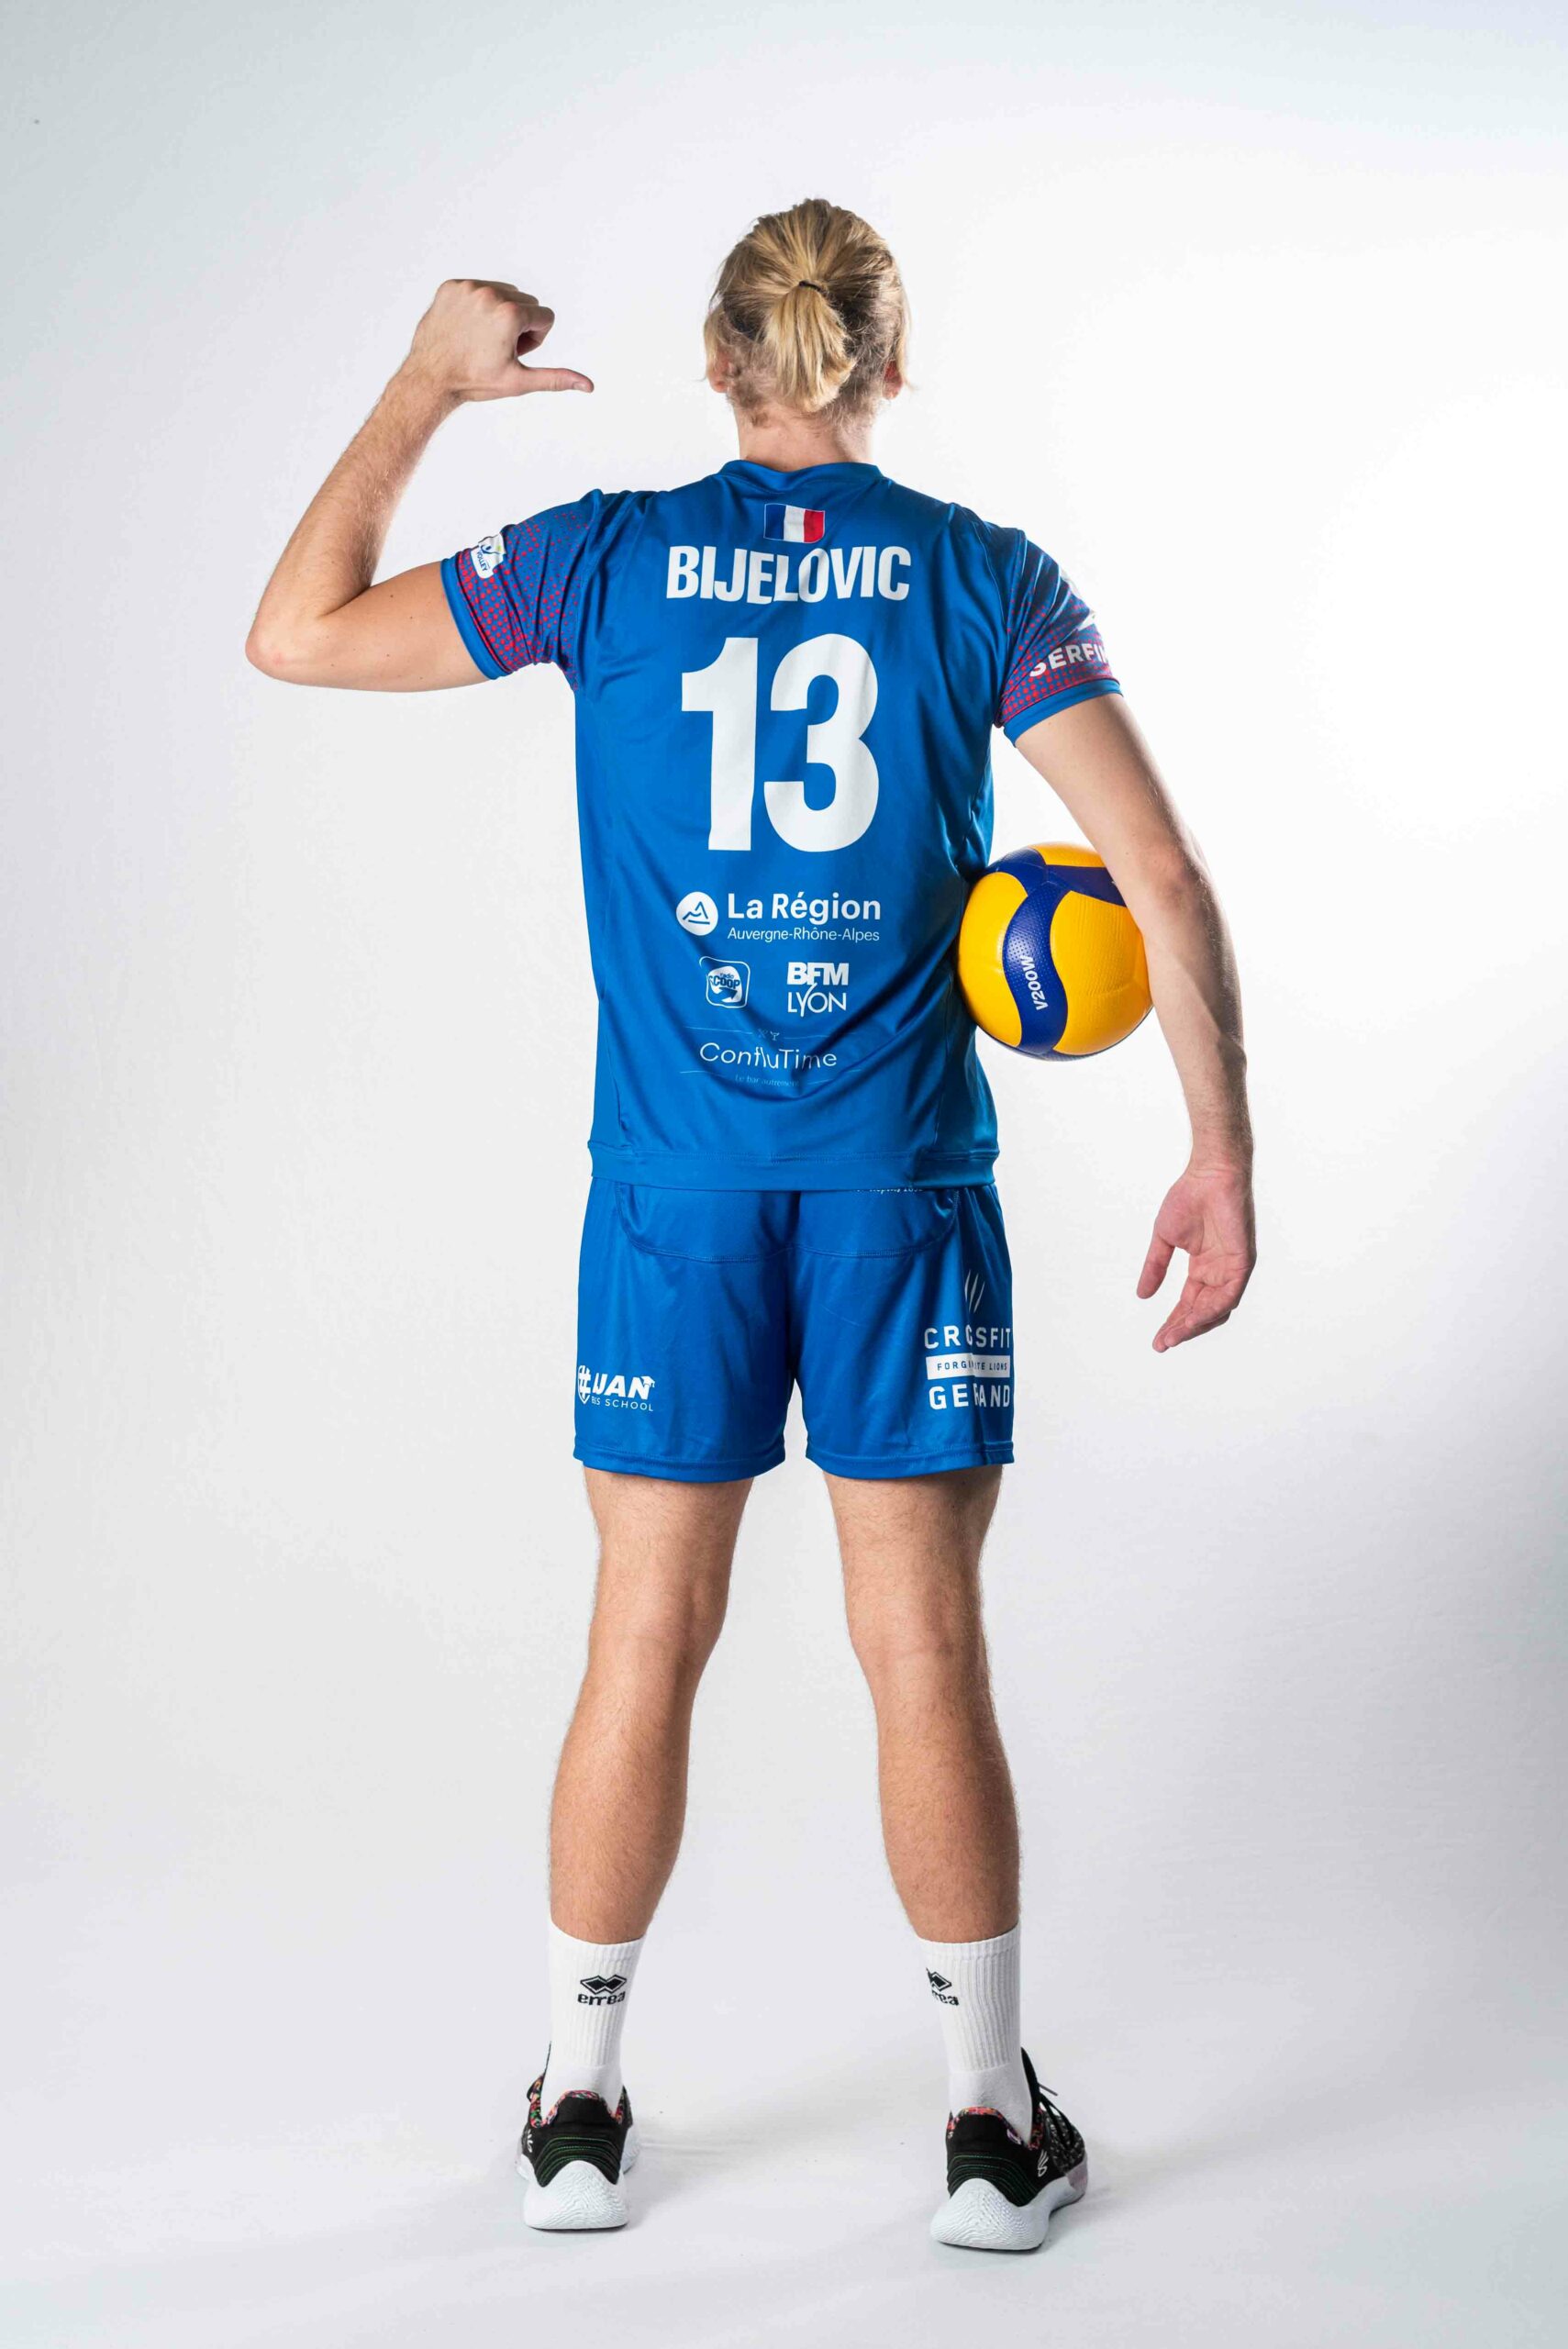 Media Day Volley ball ASUL sport shooting photo sport